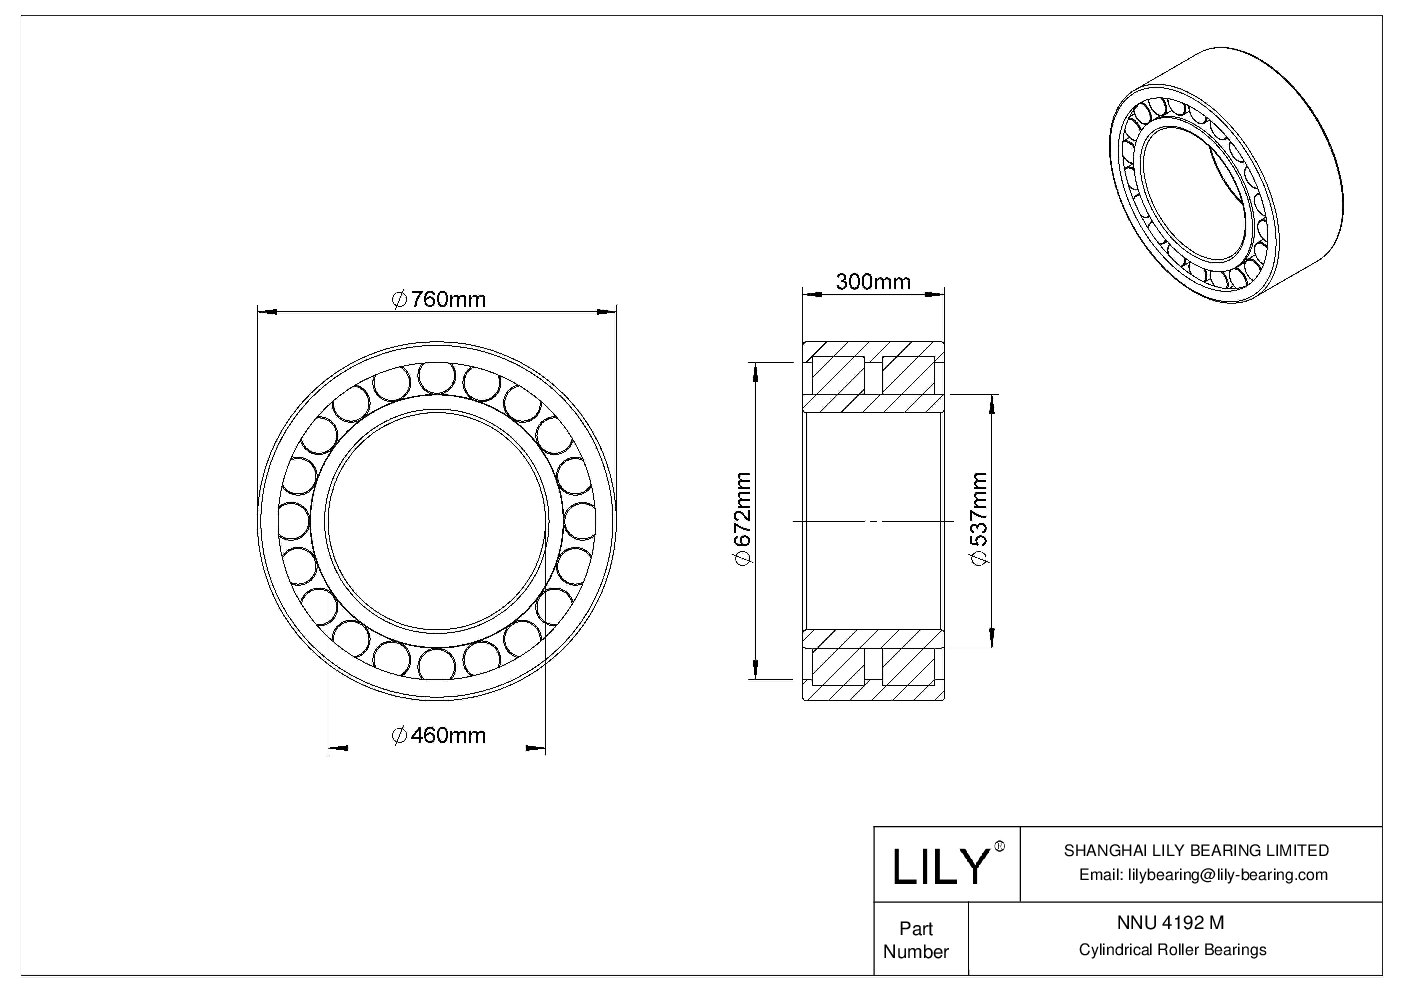 NNU 4192 M Double Row Cylindrical Roller Bearings cad drawing